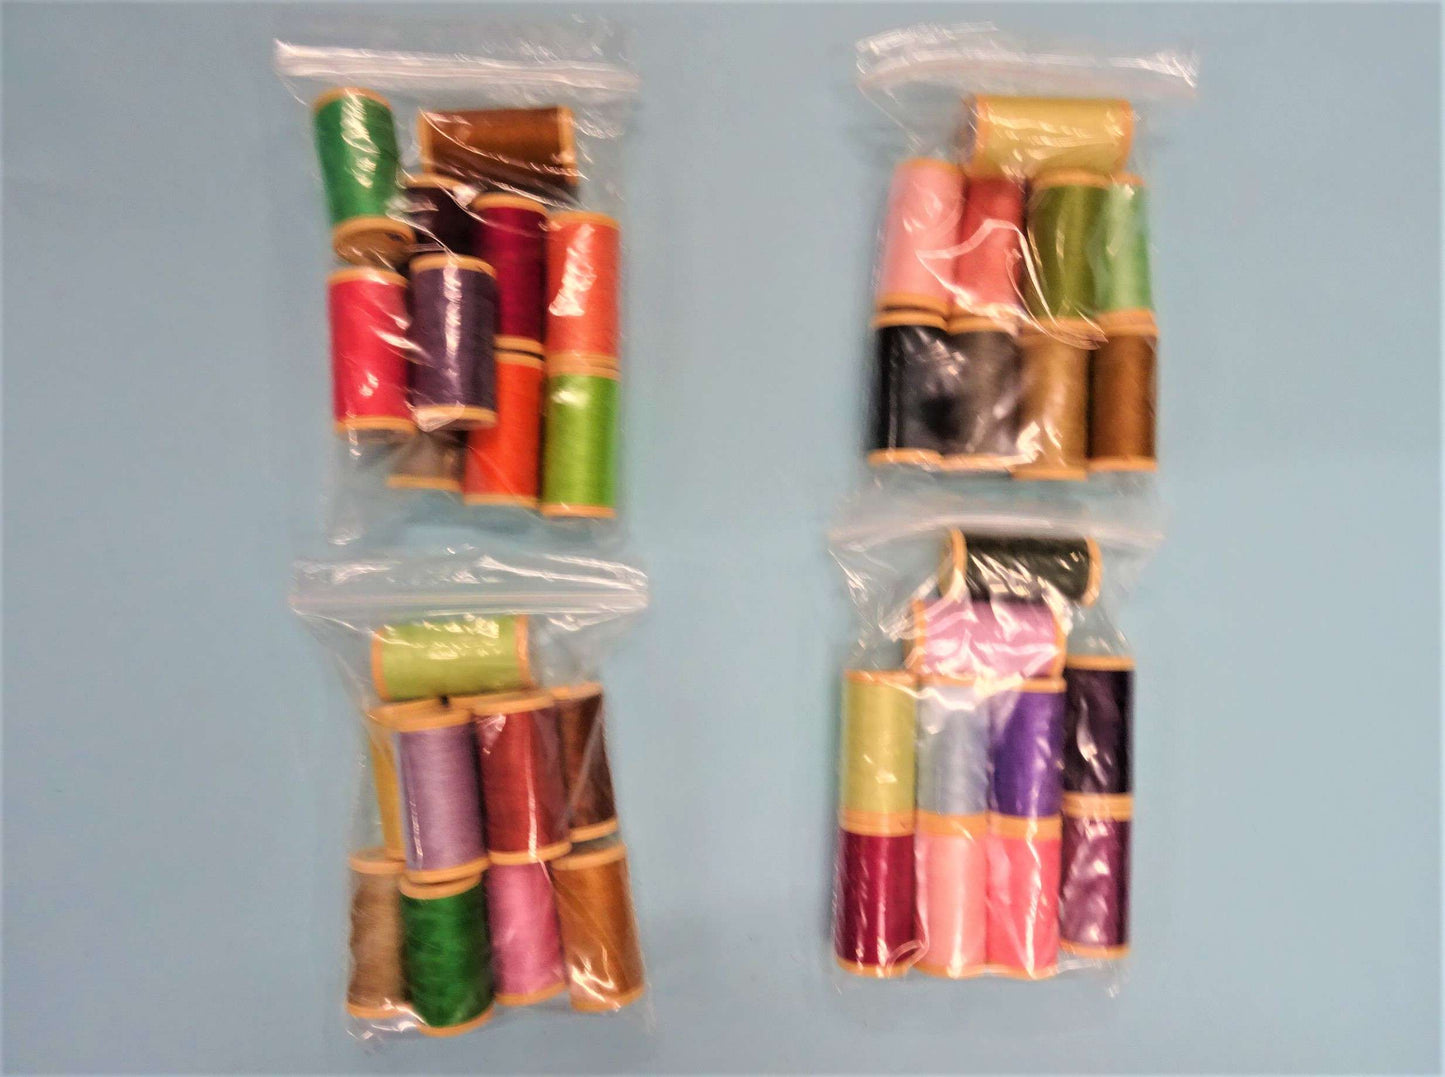 10 reels of COATS Brand COTTON sewing thread random assorted 100 metre reels clearance